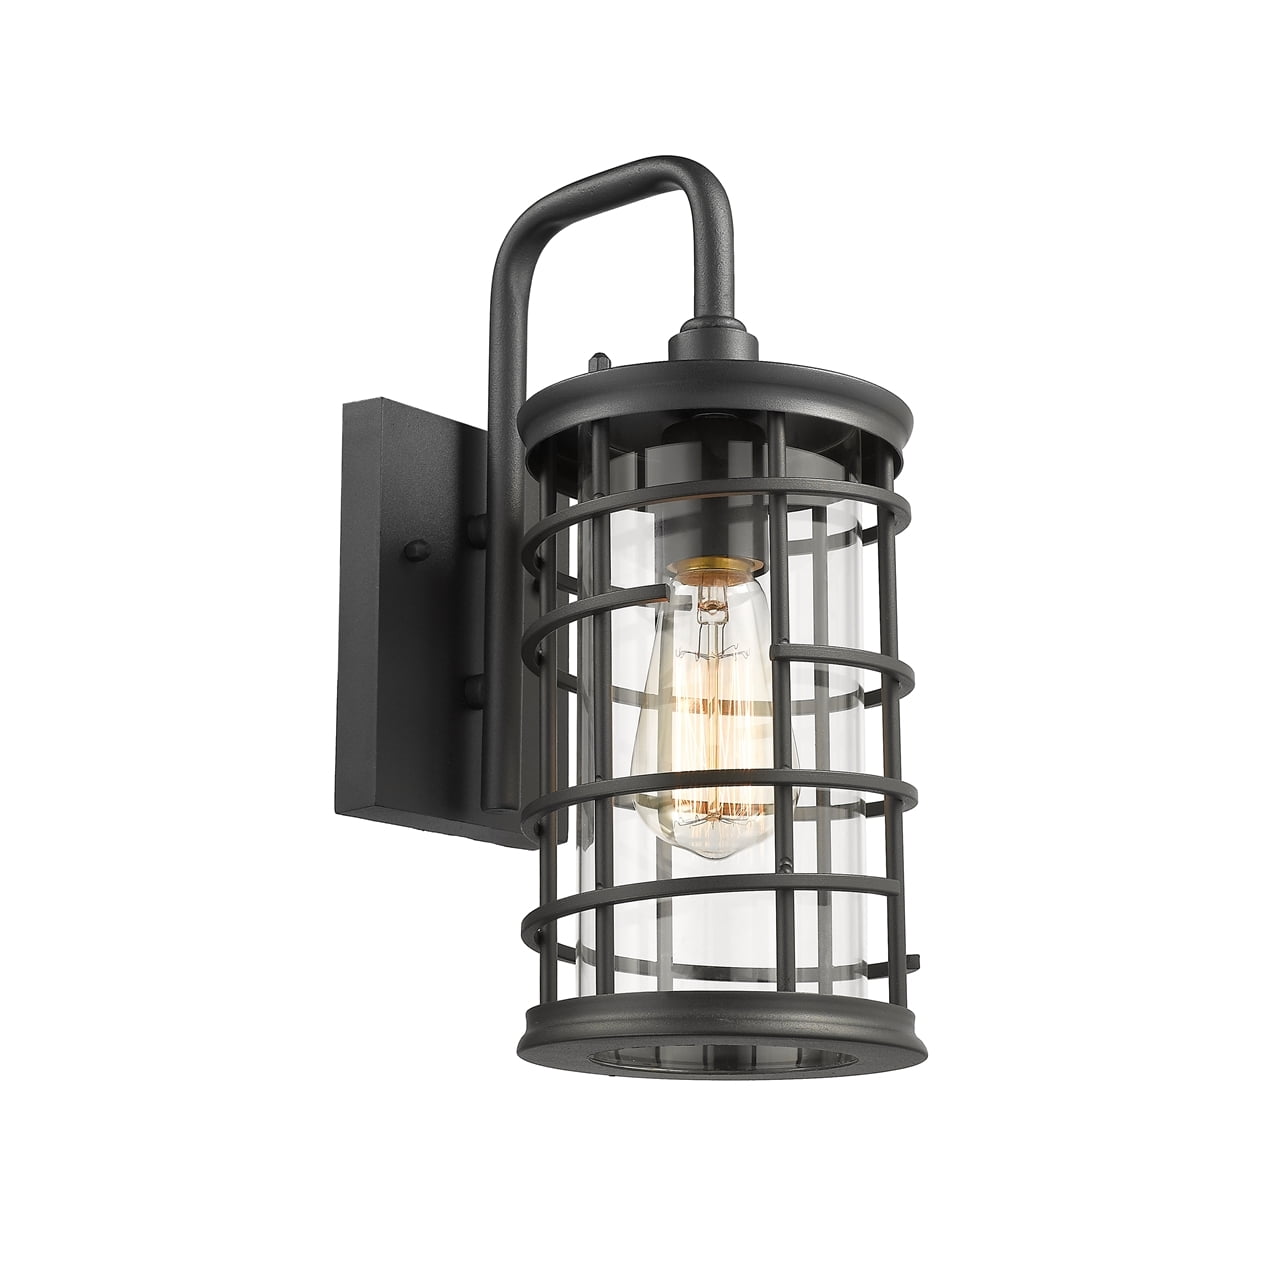 Ch2d287bk13-od1 Laurel Industrial 1 Light Textured Black Outdoor Wall Sconce - 13 In.